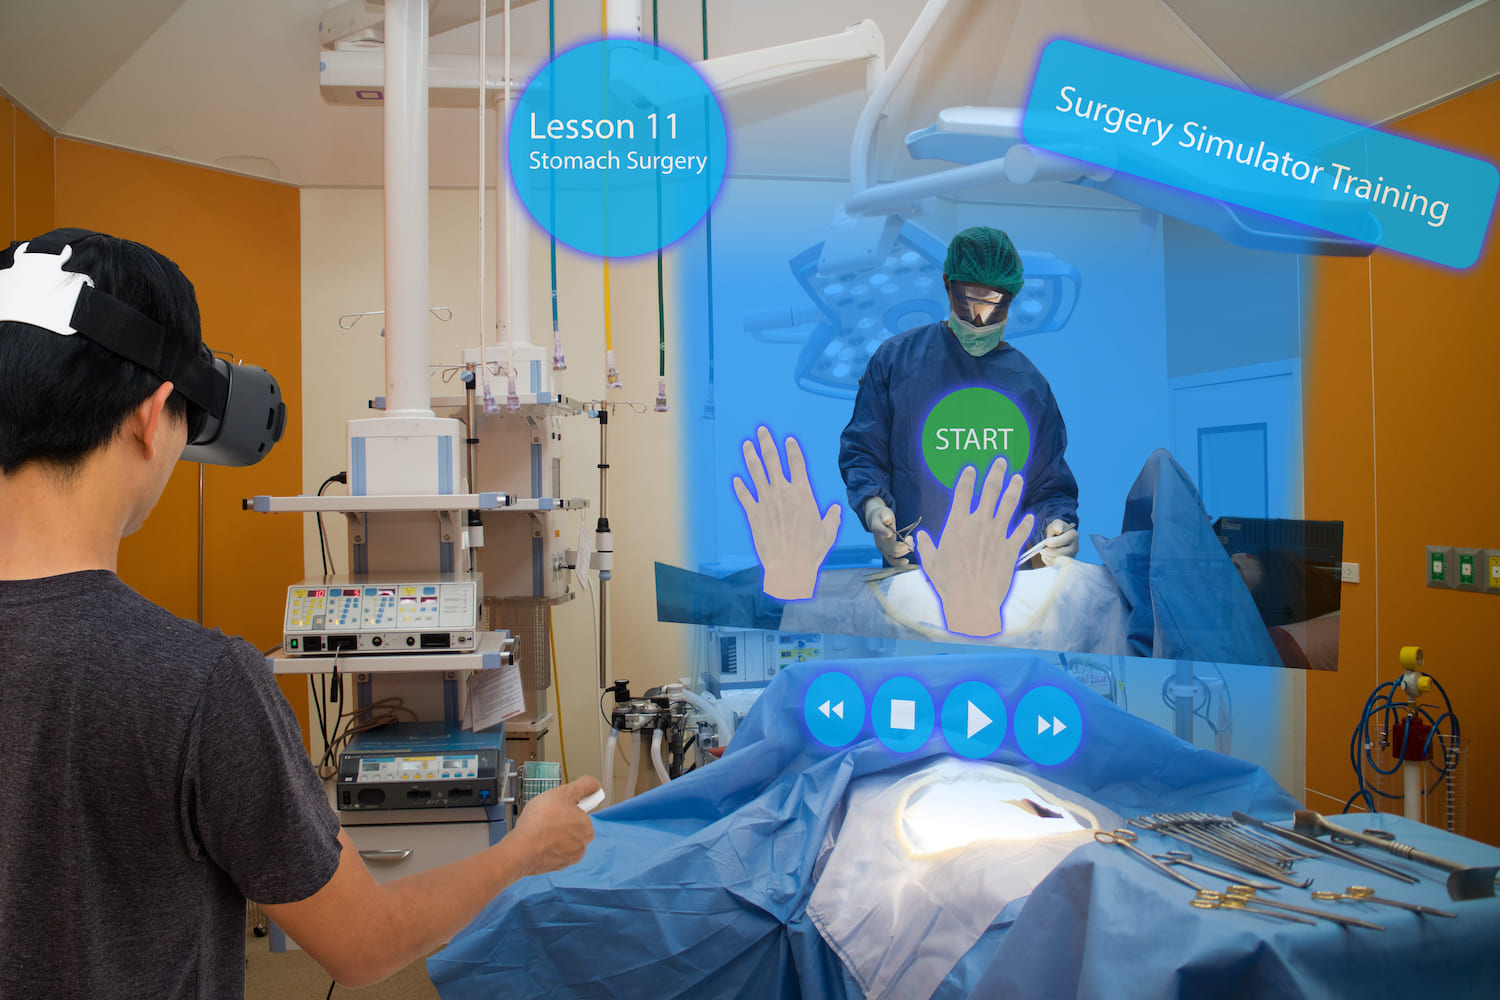 This HoloLens Childbirth Simulator Helps Train Medical Students